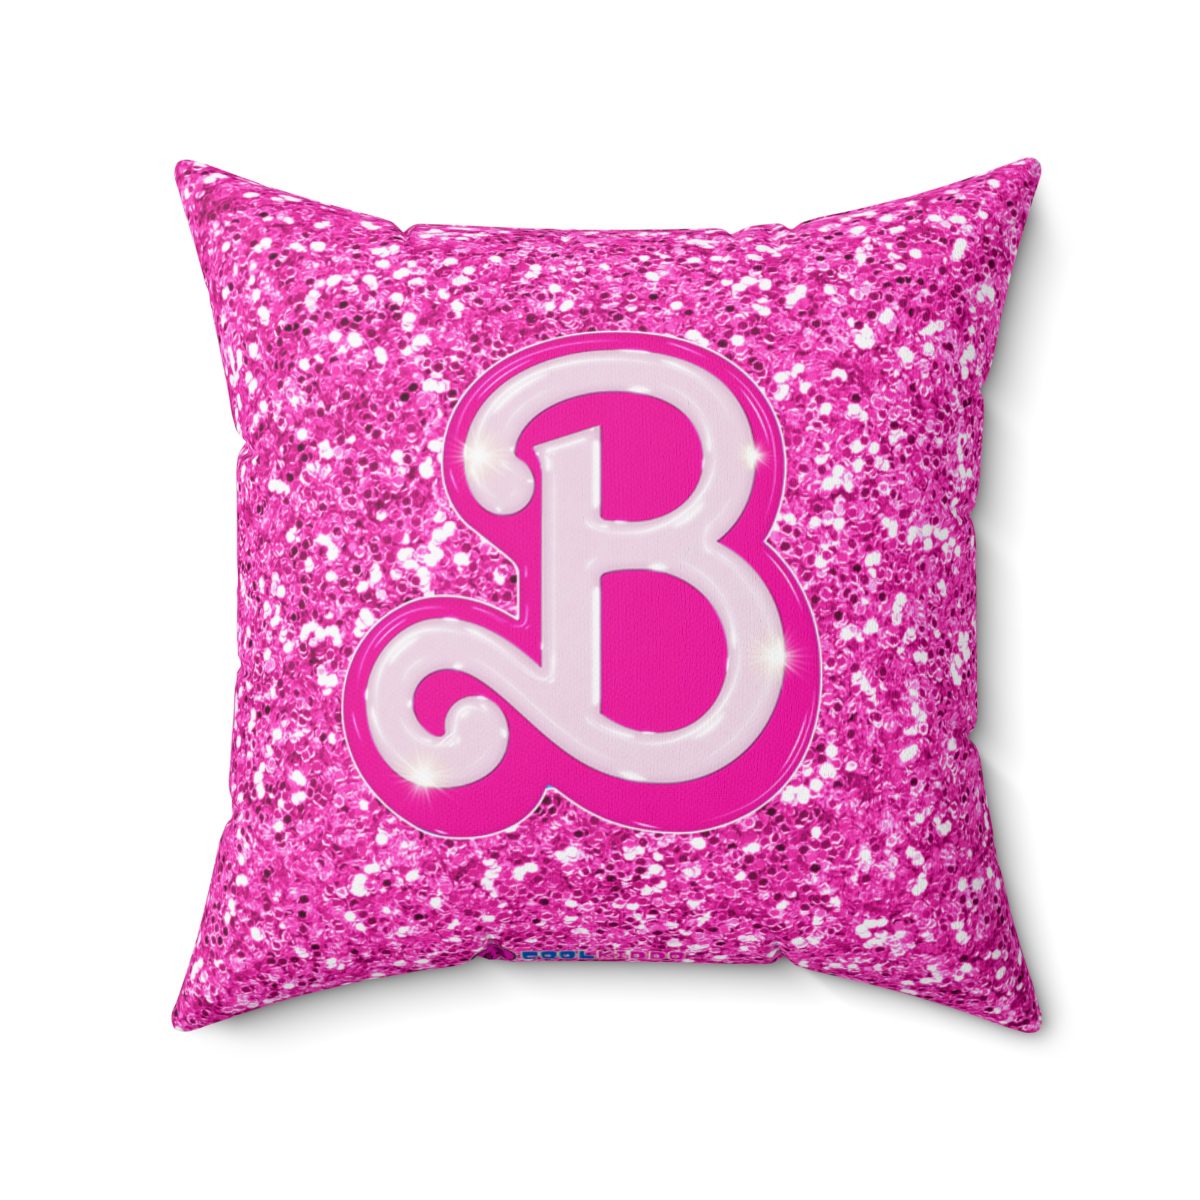 Barbie Glitter Simulation Pink Cushion: Double-Sided Sparkle for Stylish Comfort Cool Kiddo 22